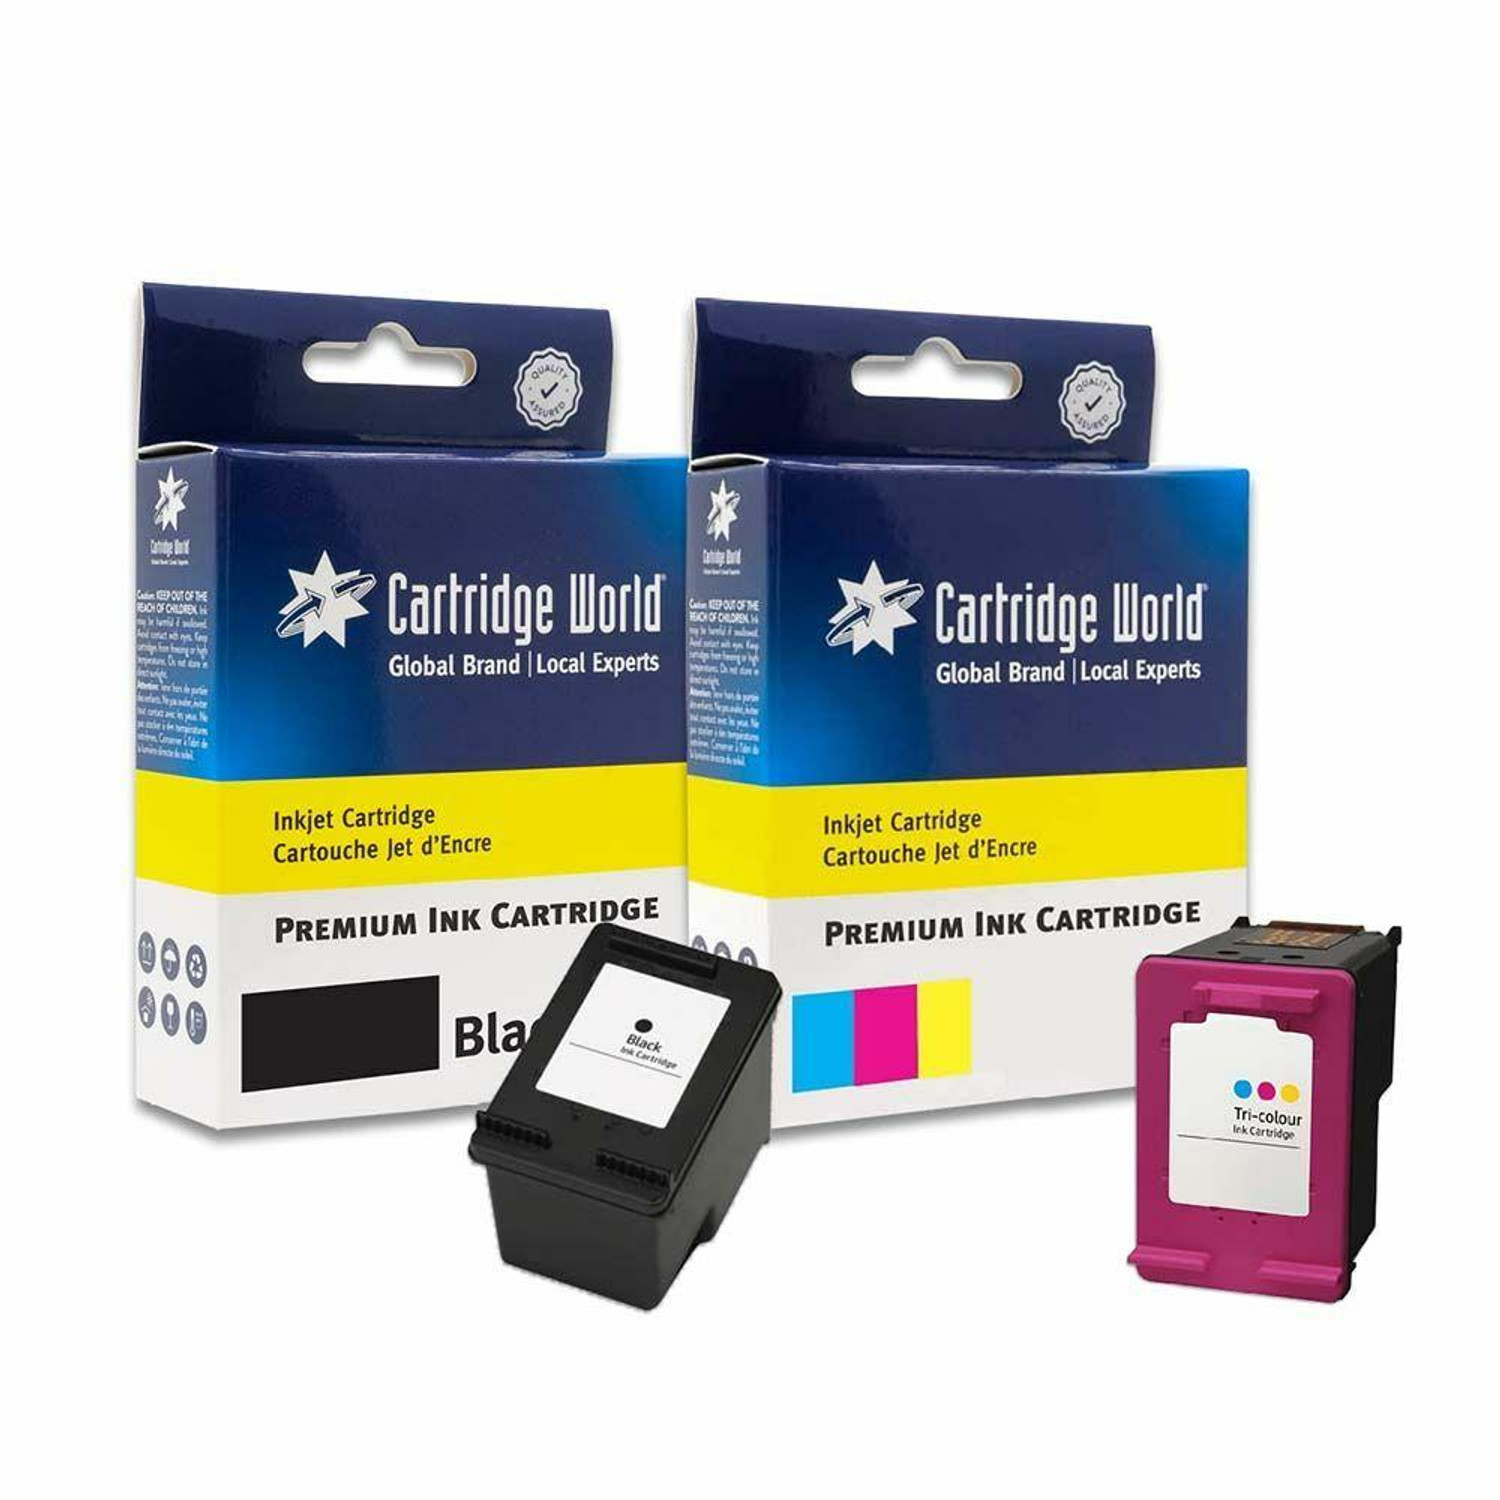 Buy HP Ink Cartridges Online - Quality Guaranteed